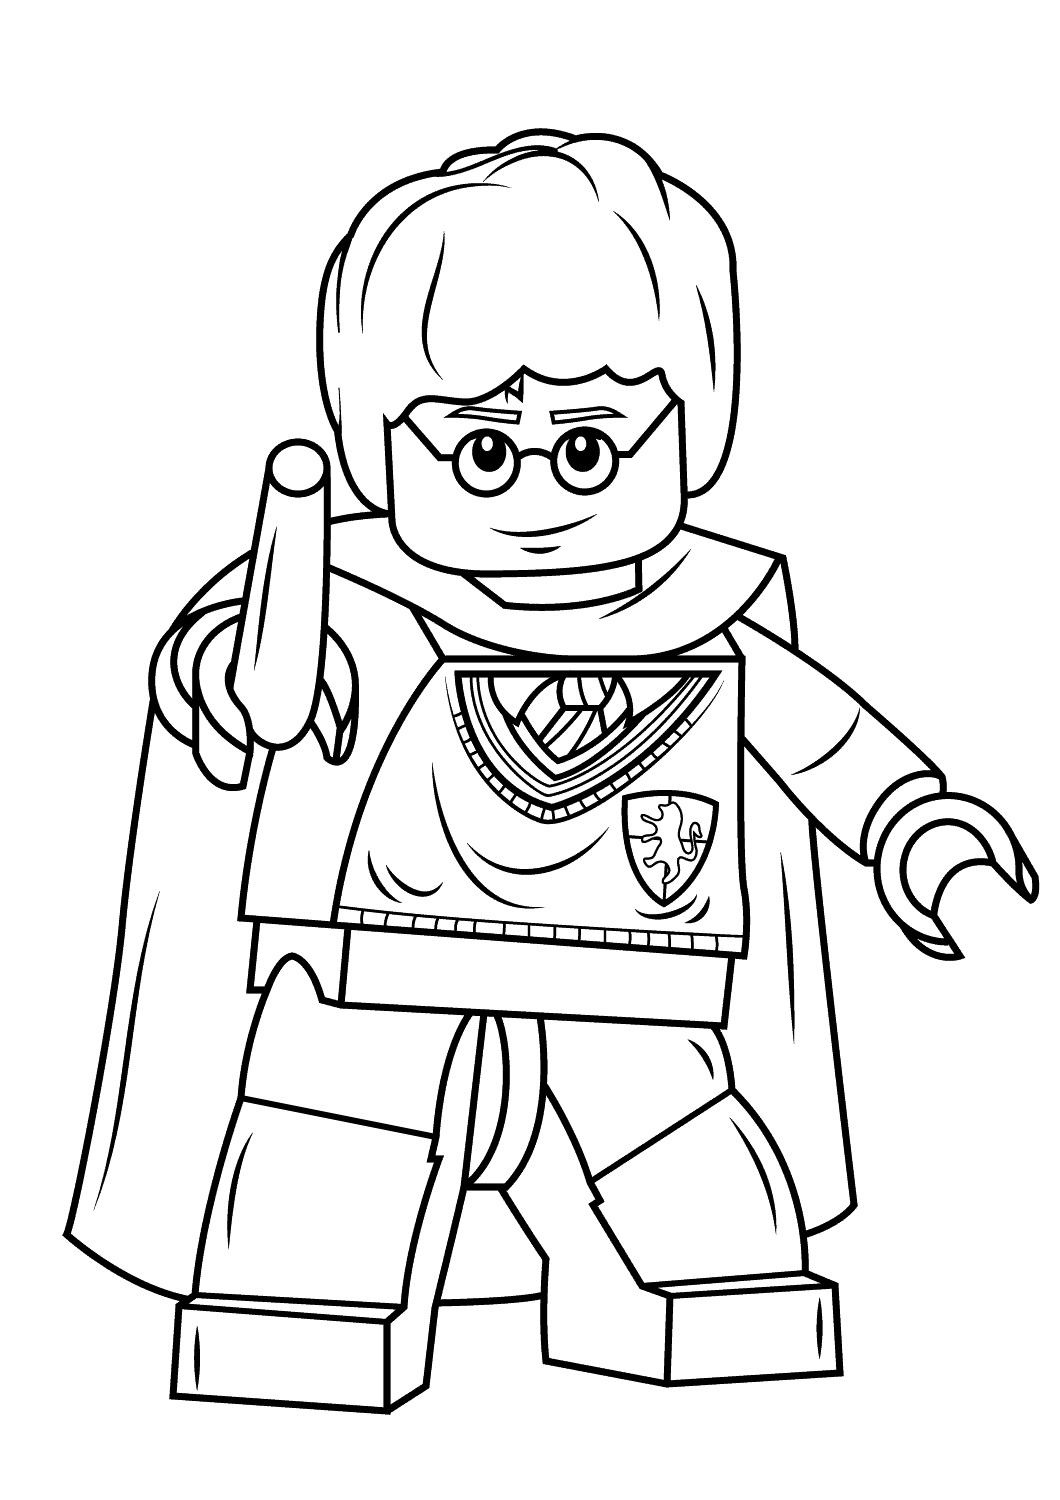 lego-emmet-coloring-page-free-coloring-pages-online